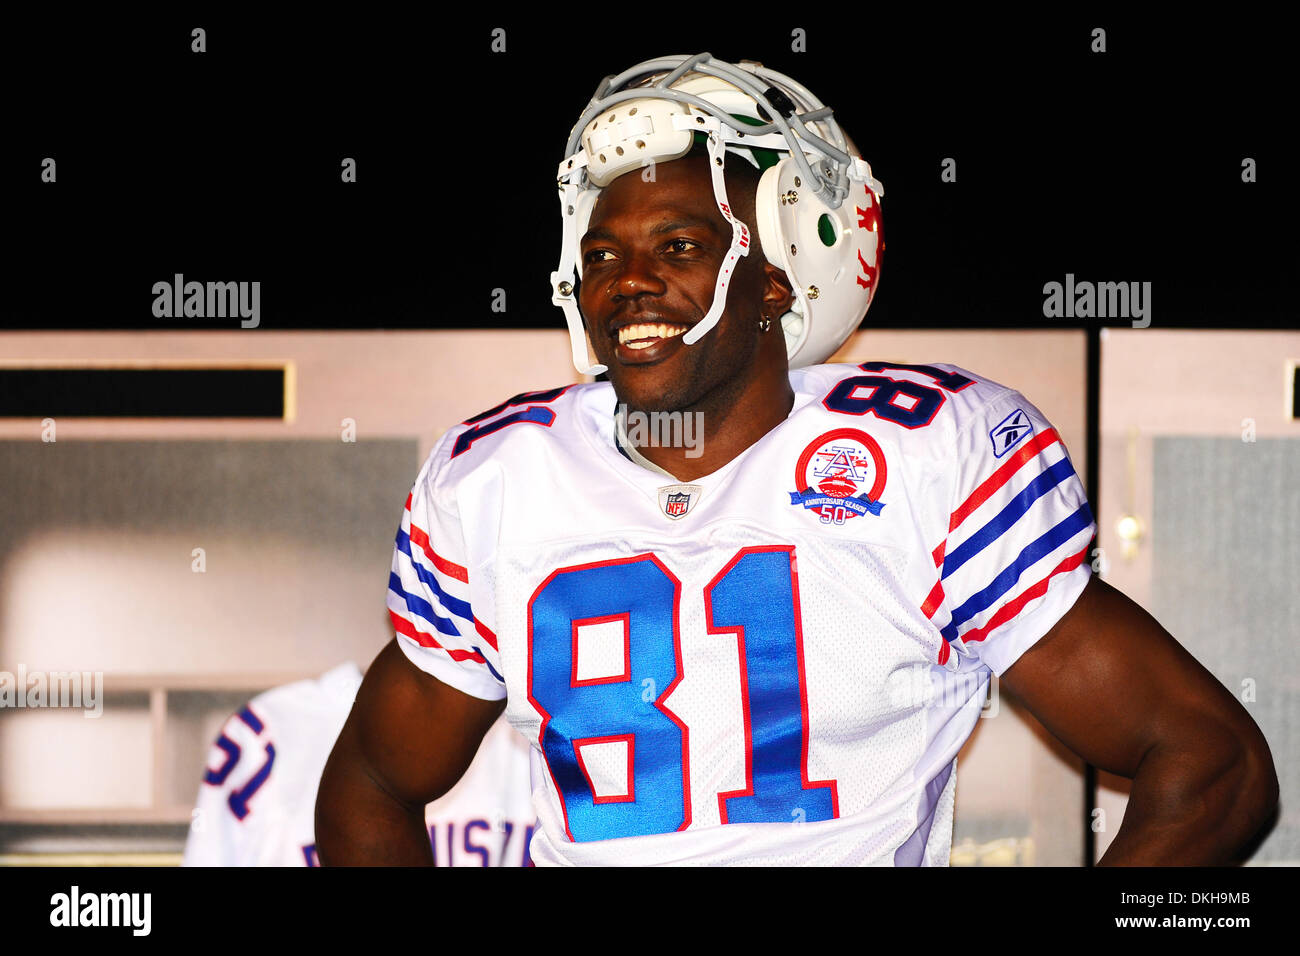 Buffalo Bills widereciever Terrell Owens is all smiles as he models the  throwback jersey for the 50th season celebration durring Thursday nights  practice at St. John Fisher College in Rochester, NY (Credit